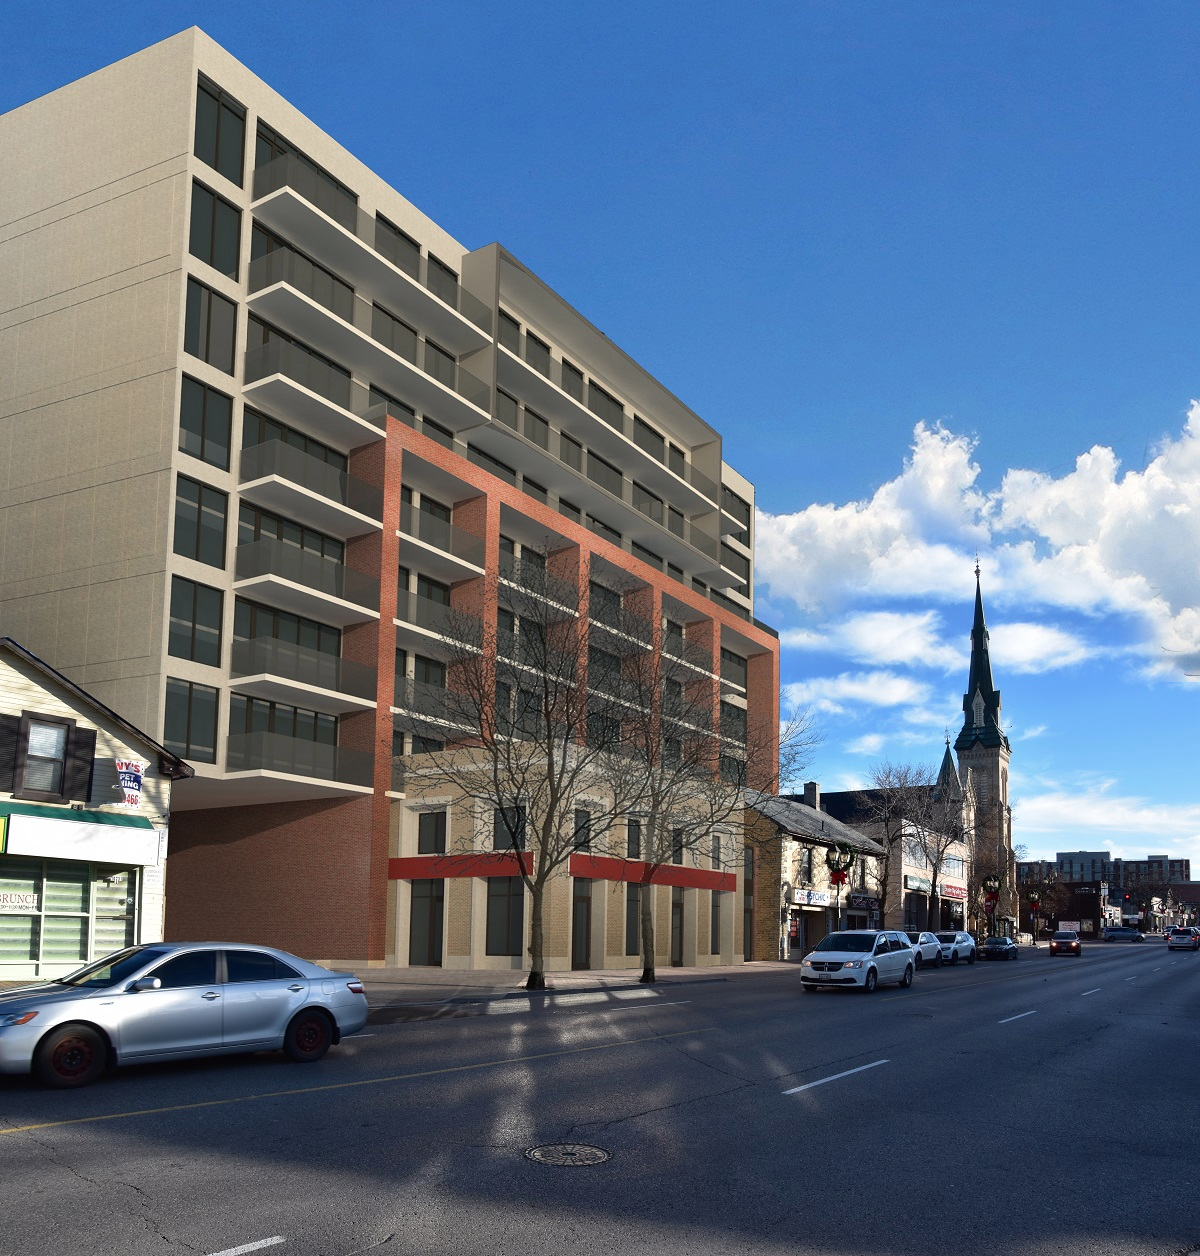 Richmond Hill 8 Storey Yonge Street Project Appealed To Omb